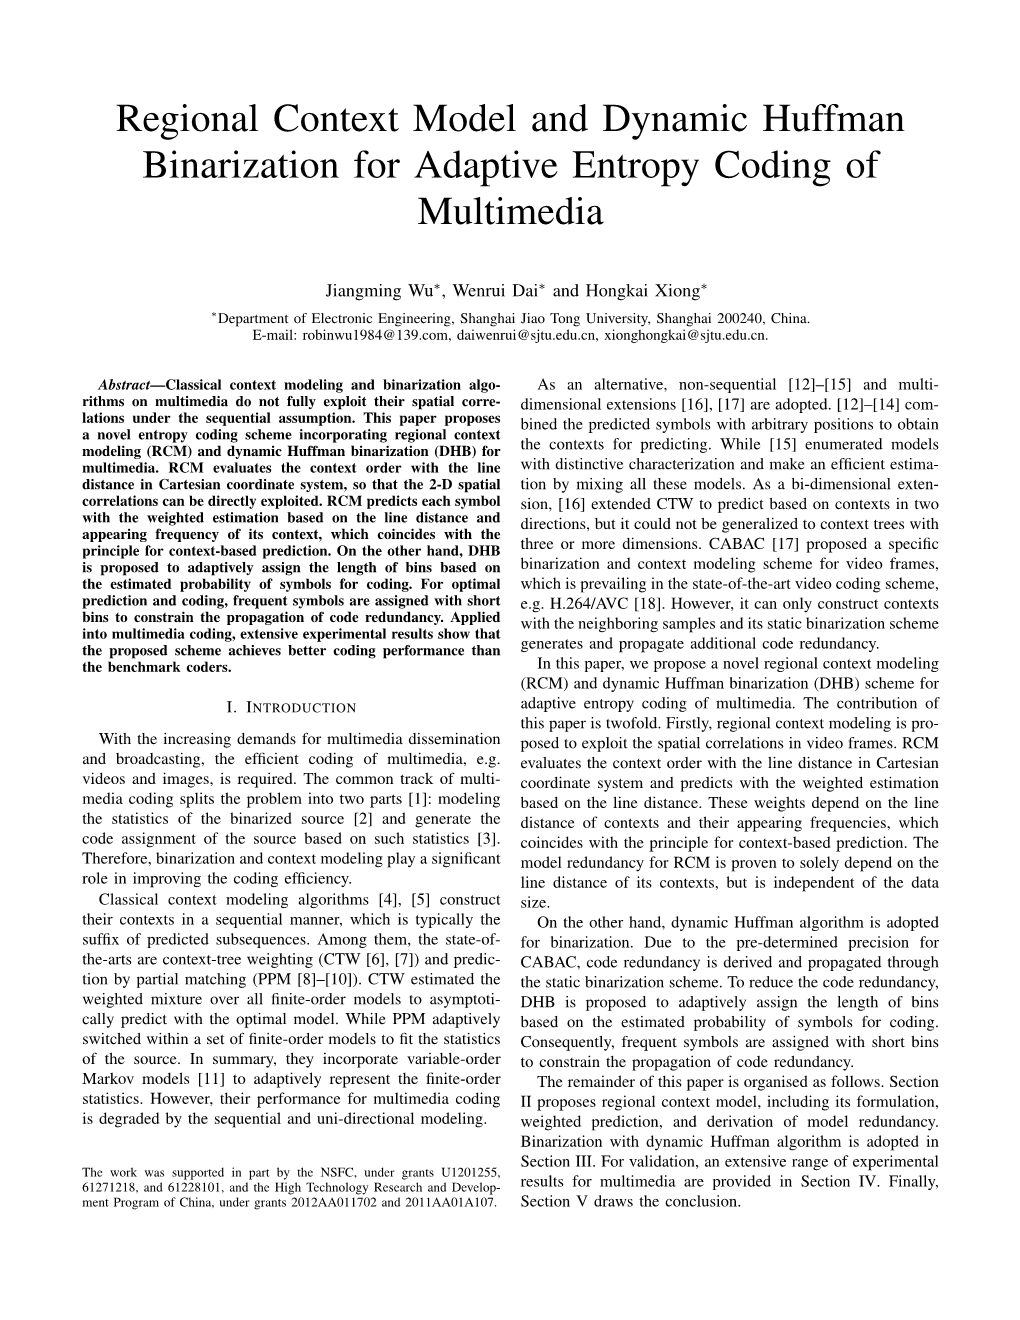 Regional Context Model and Dynamic Huffman Binarization for Adaptive Entropy Coding of Multimedia